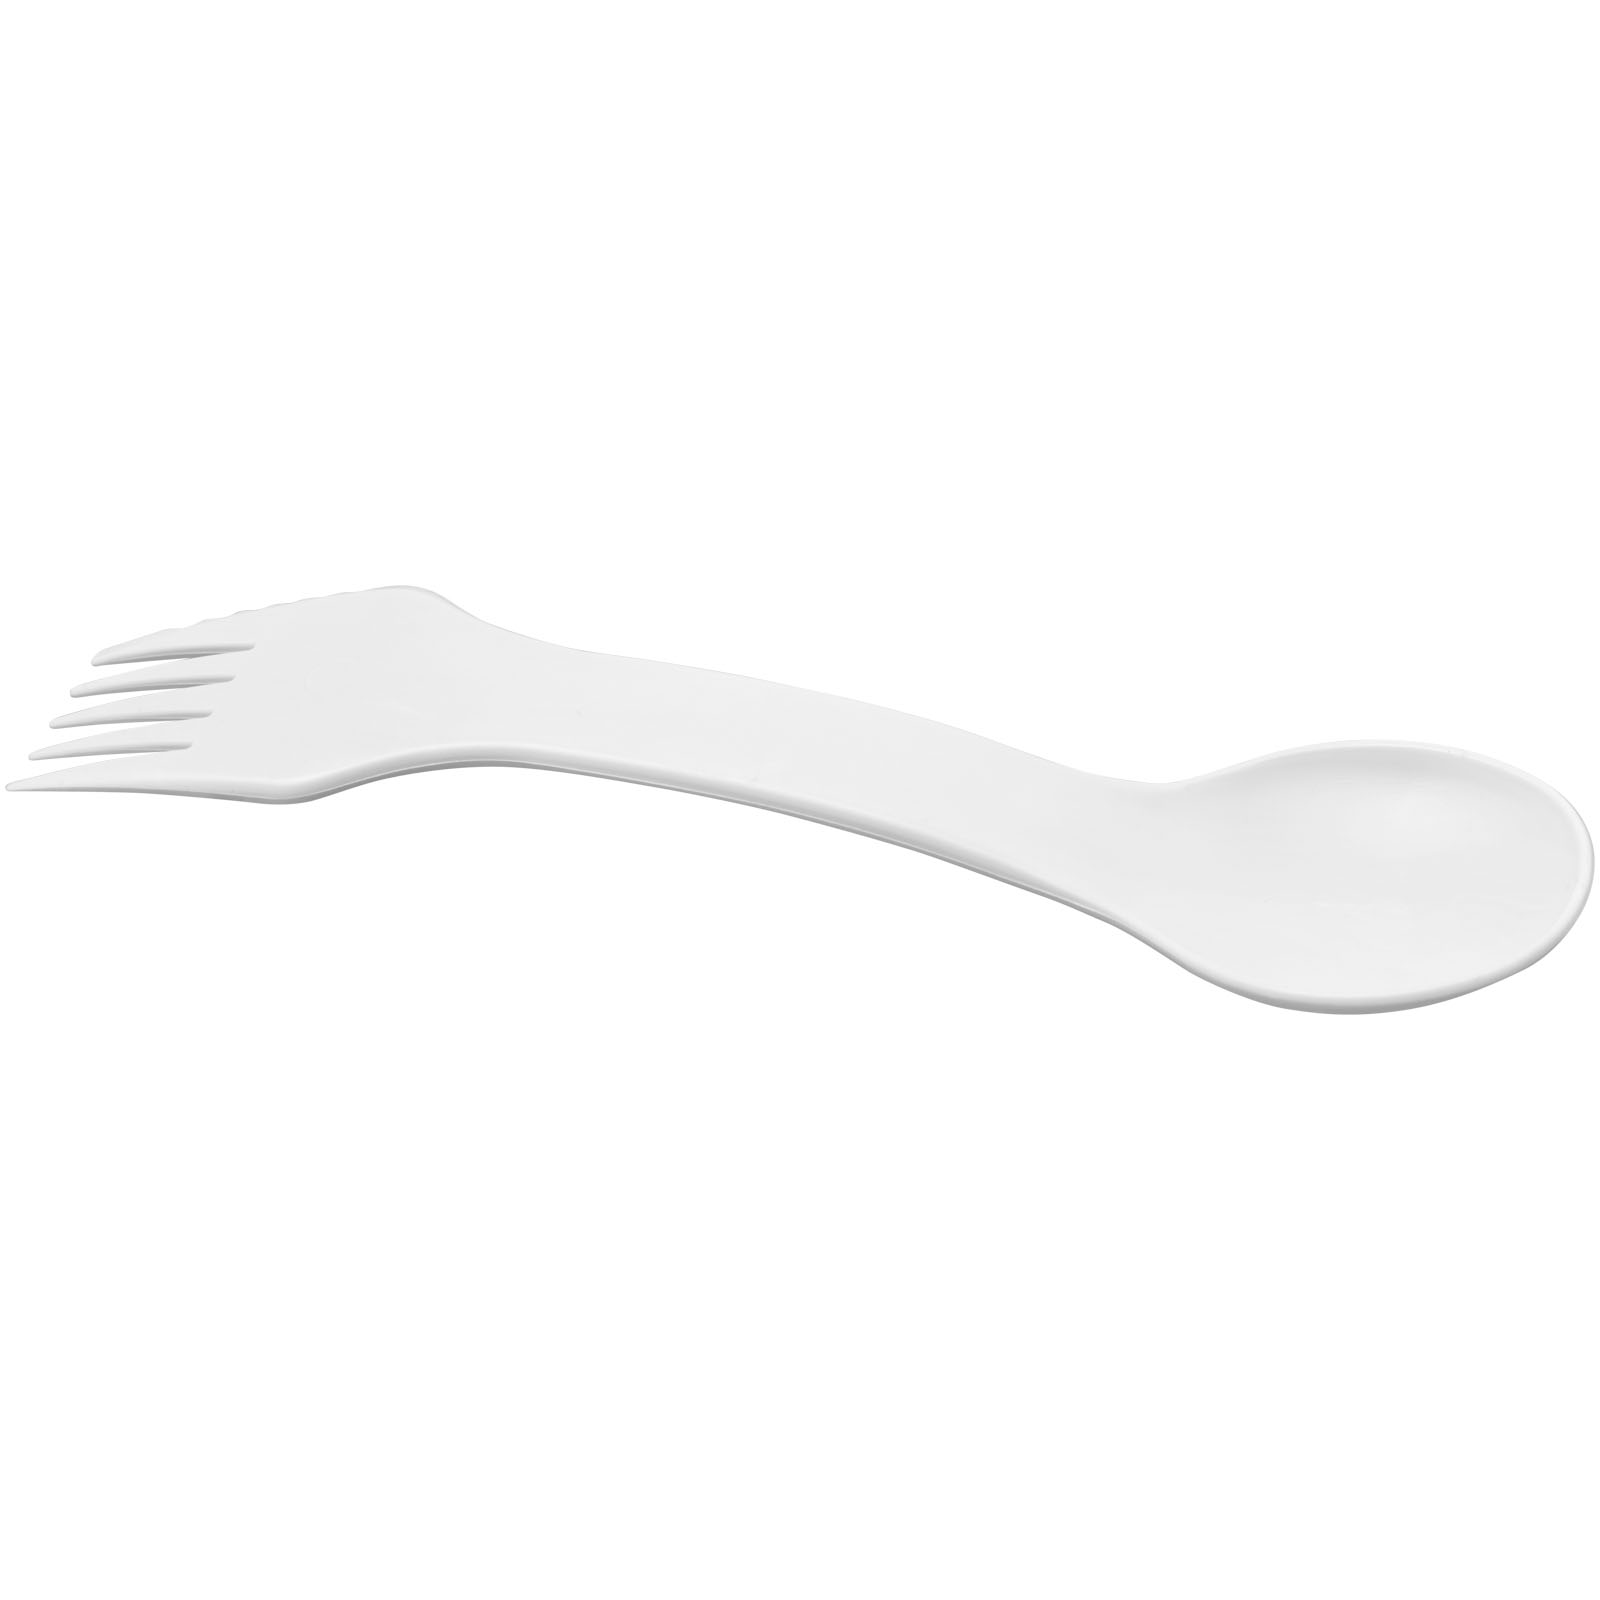 Plastic travel cutlery NOSEY, 3 in 1